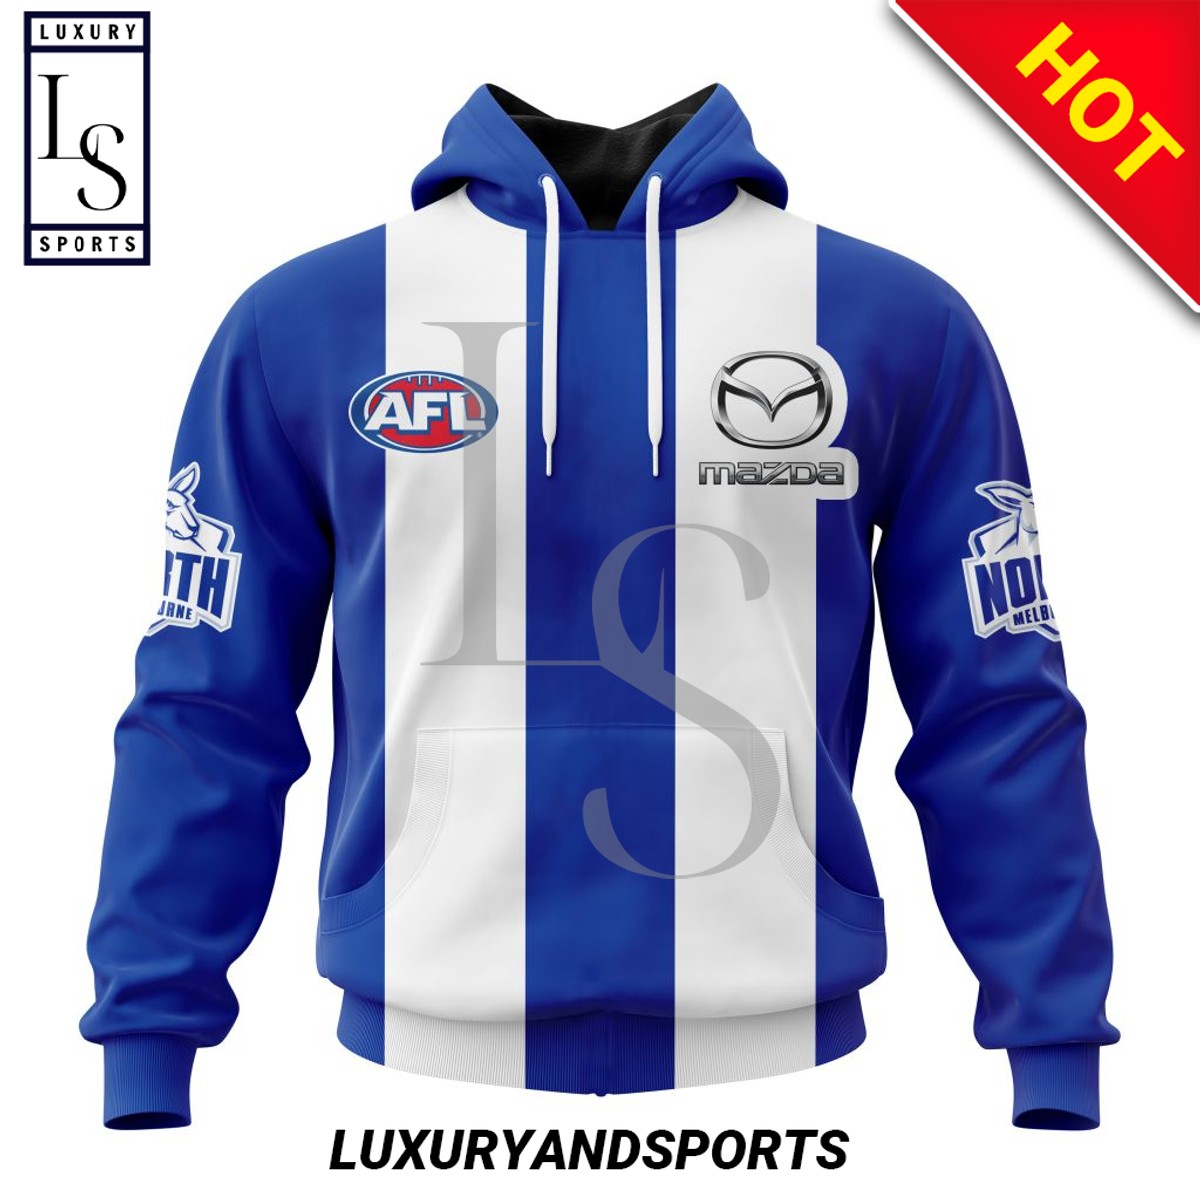 Personalized AFL North Melbourne Football Club Home Kits Hoodie